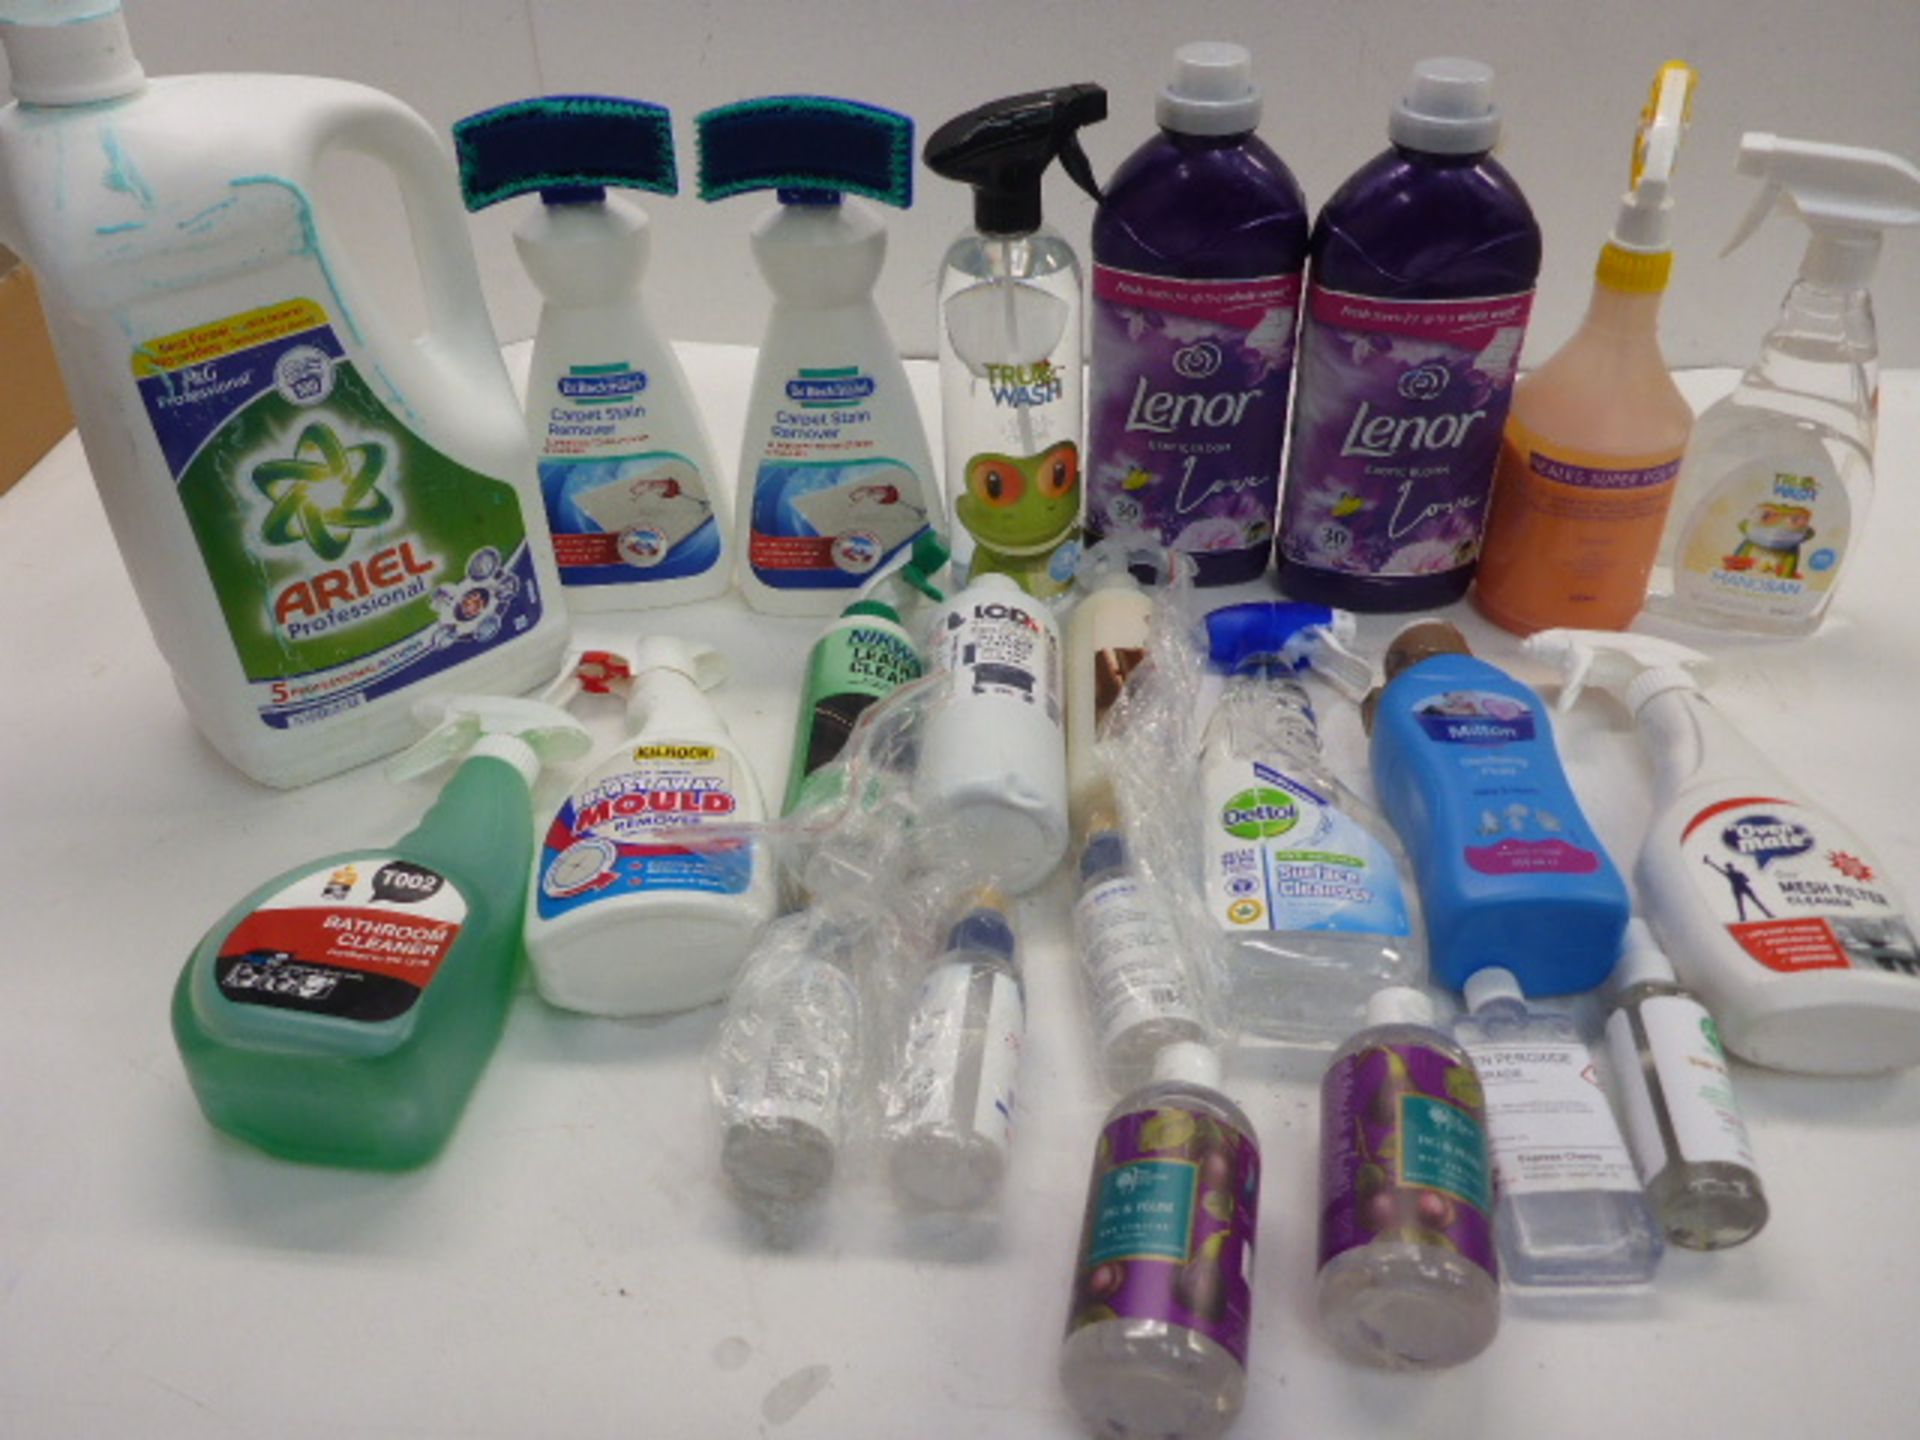 Ariel washing liquid, fabric conditioner, carpet stain remover, polish, sanitizer, mould remover and